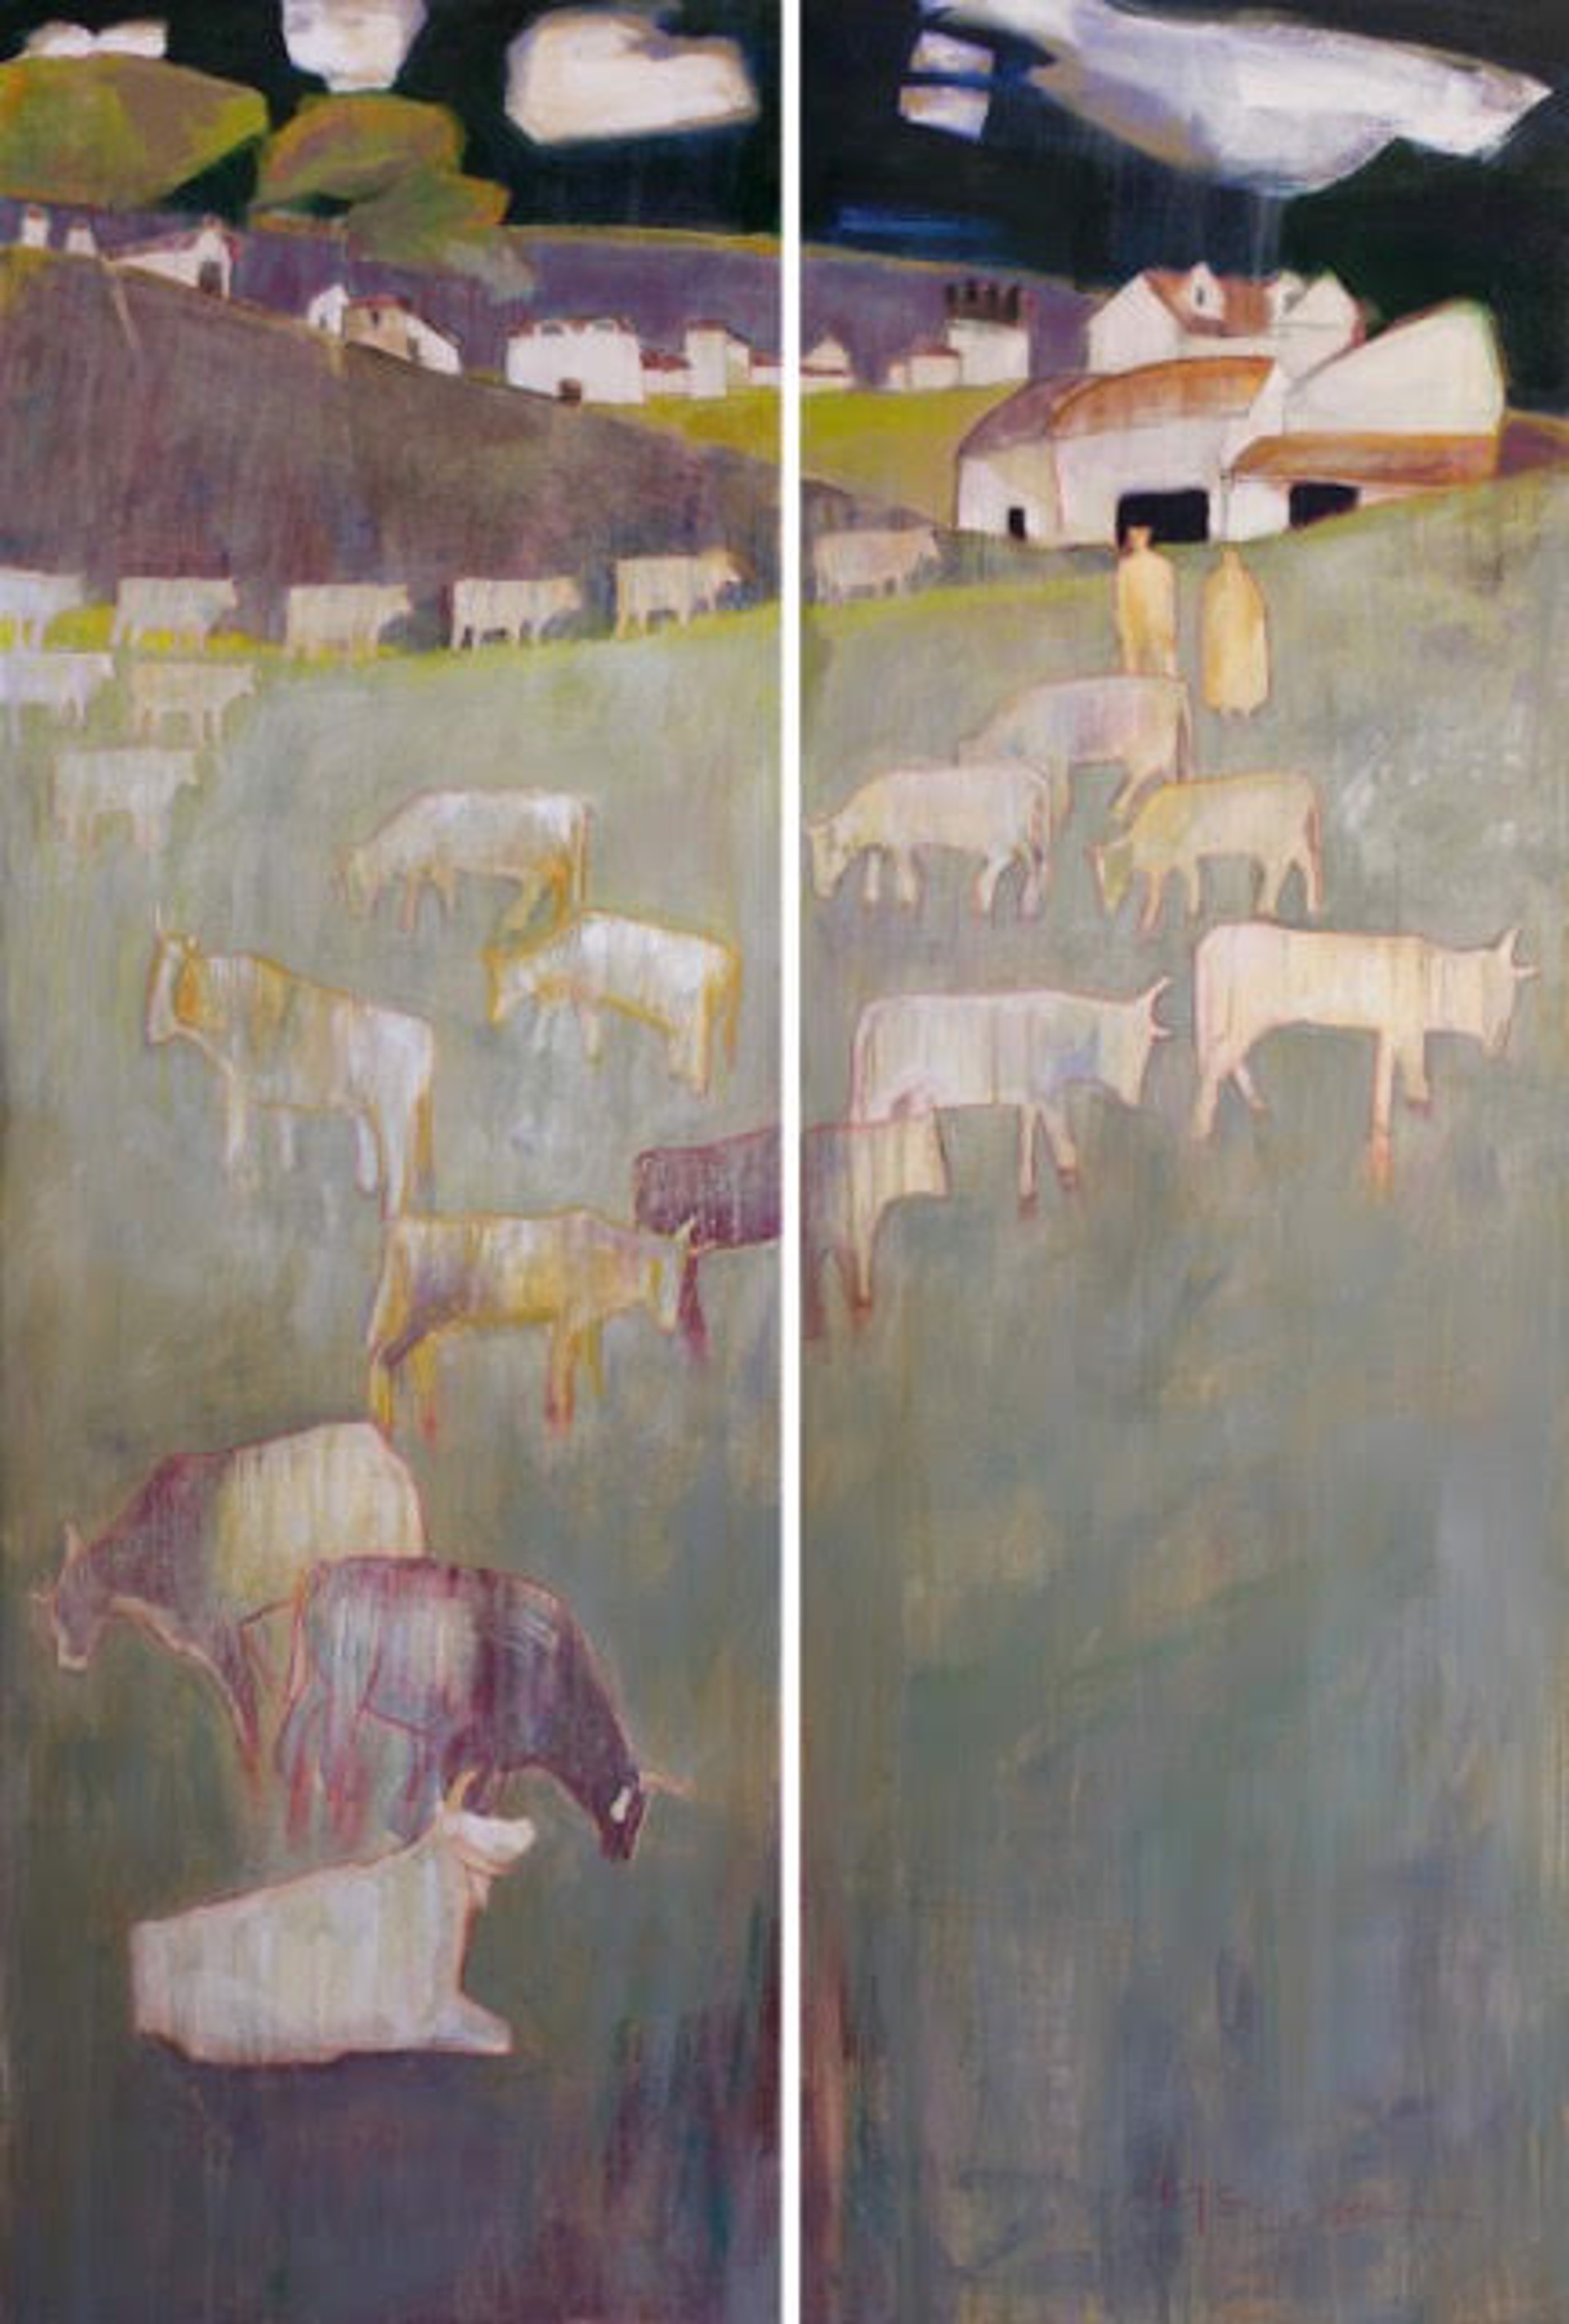 Come In Out of the Rain, diptych by Peggy McGivern